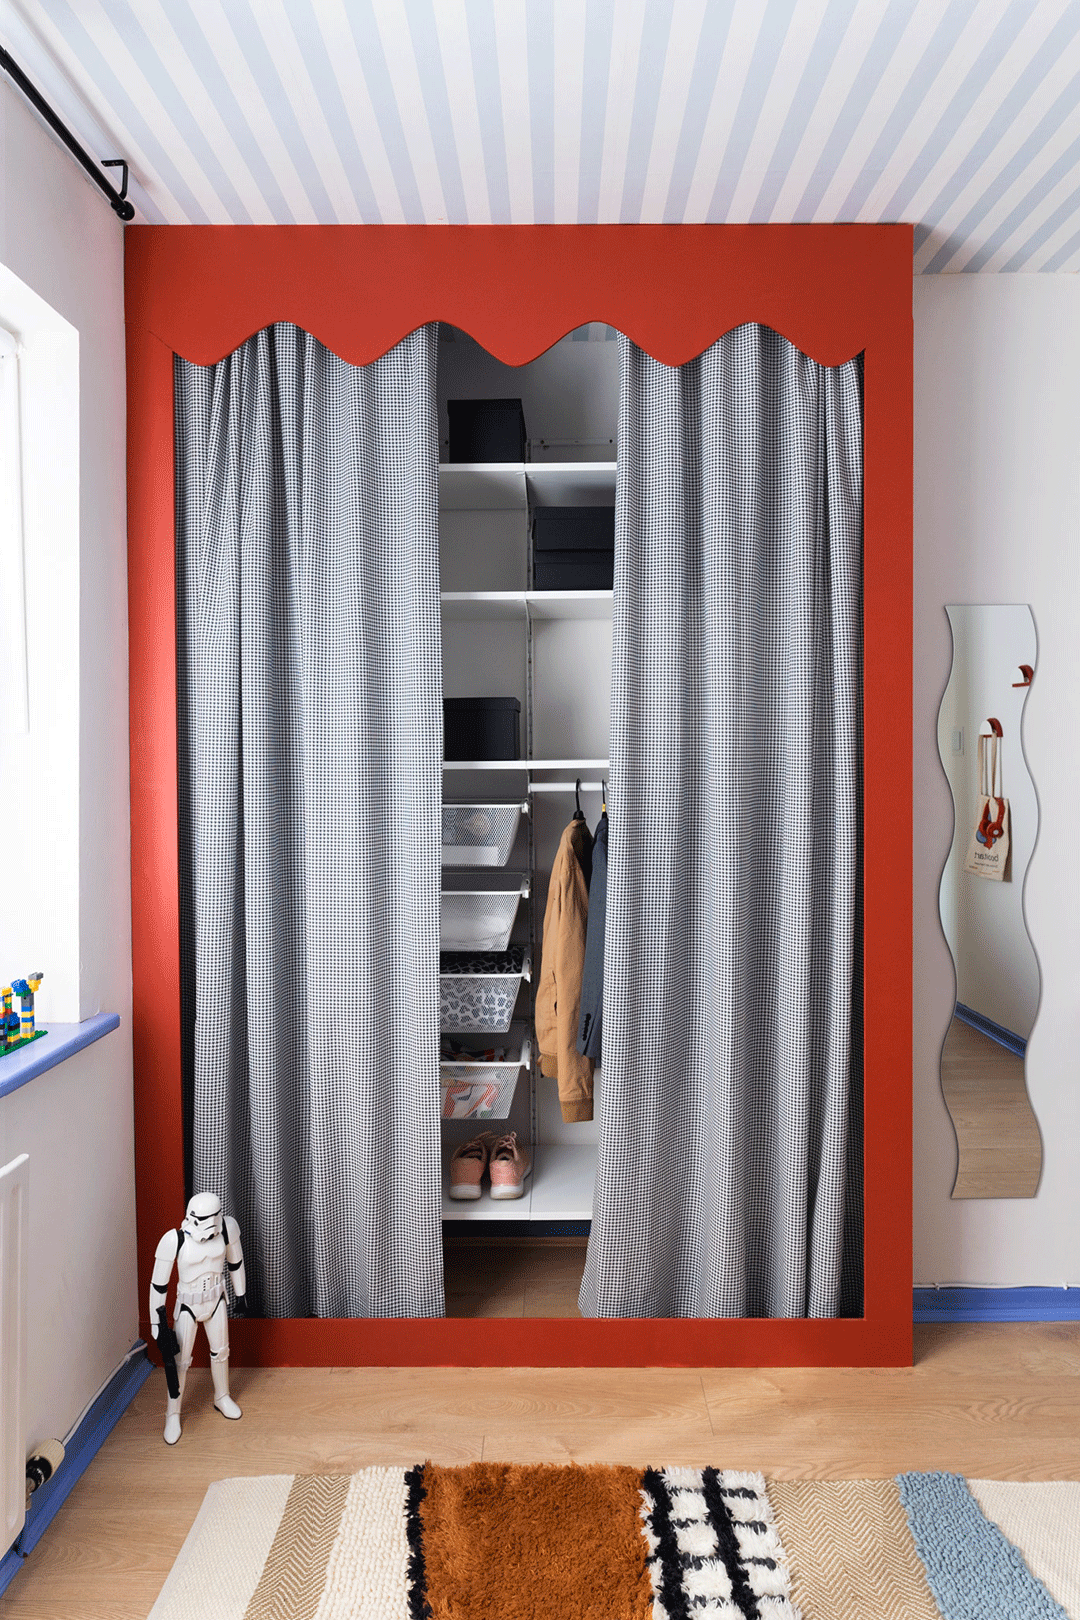 framed closet's curtains opening and closing